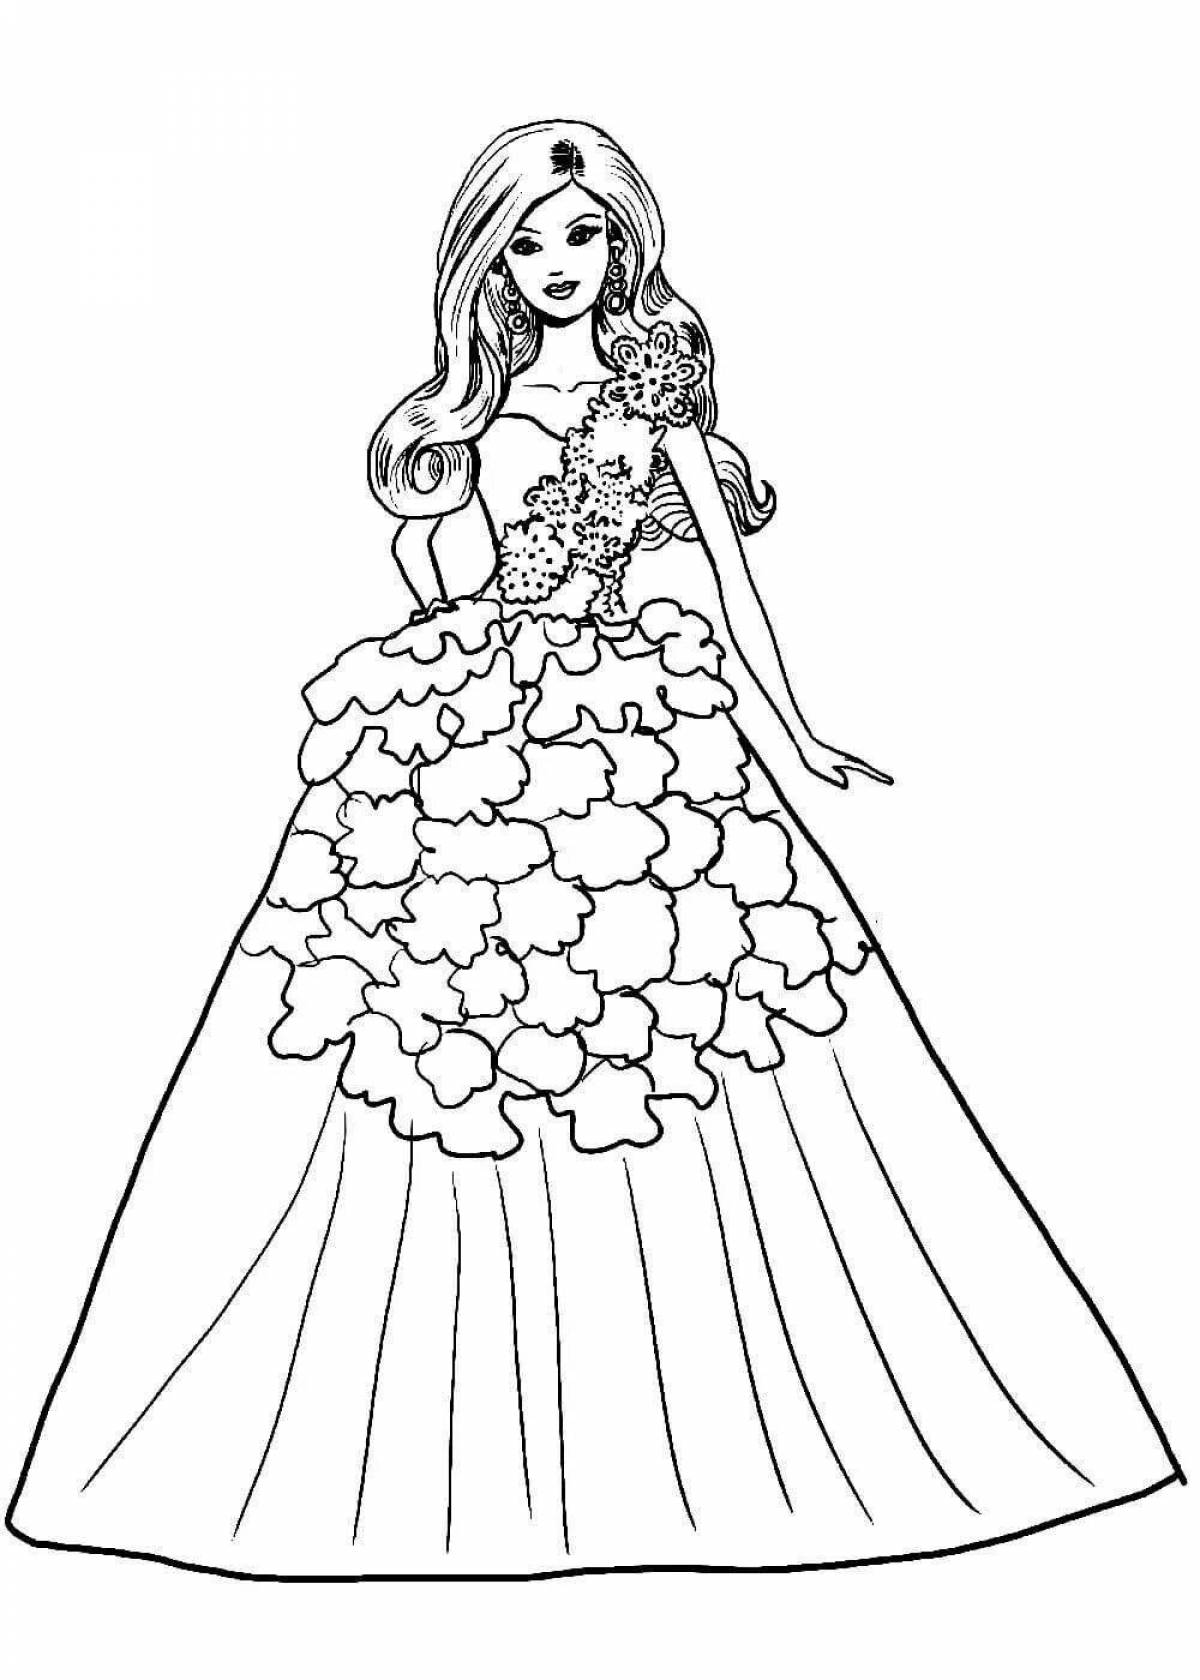 Exquisite barbie doll coloring book